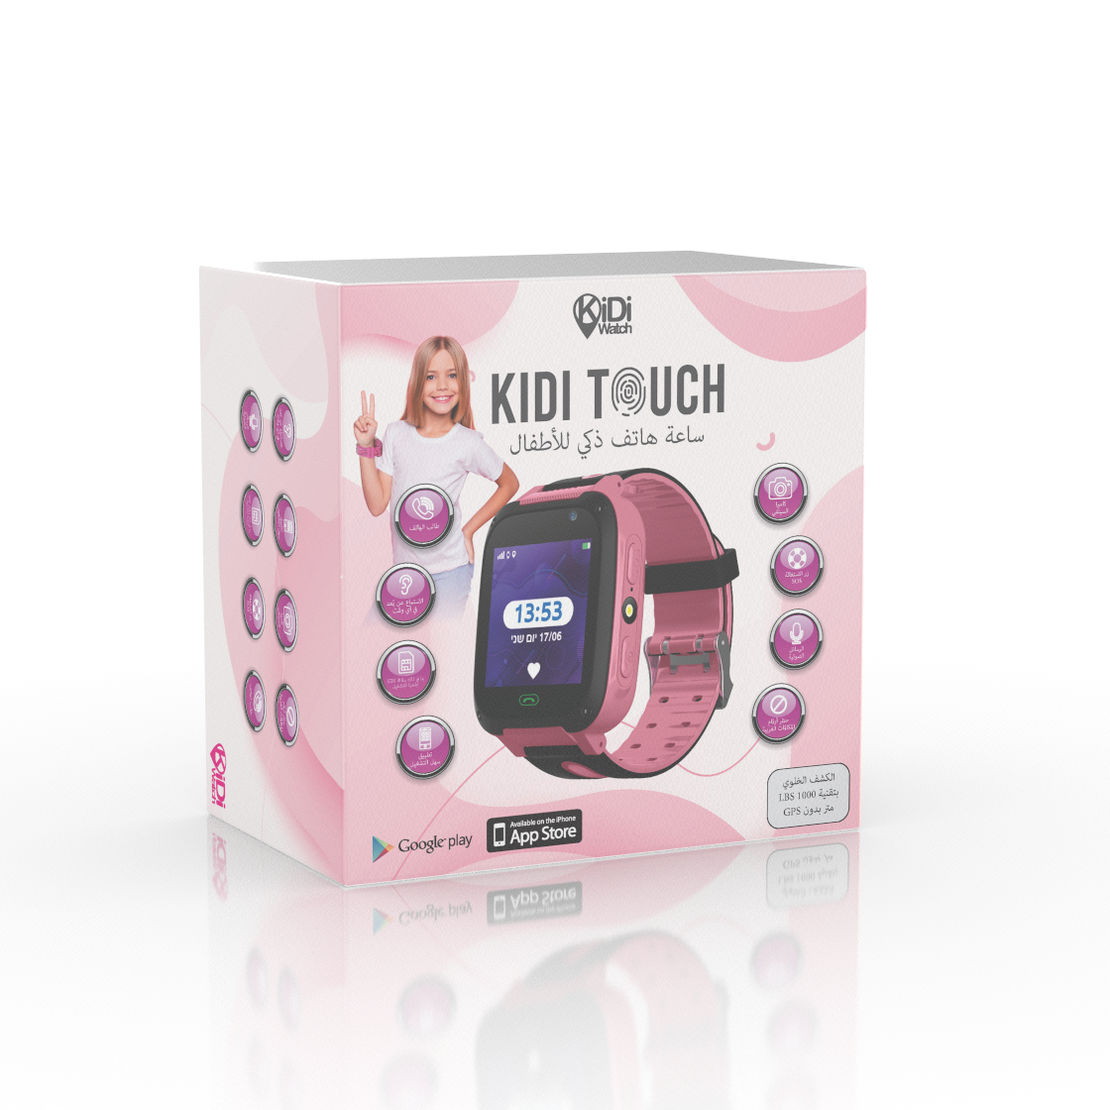 KIDI TOUCH